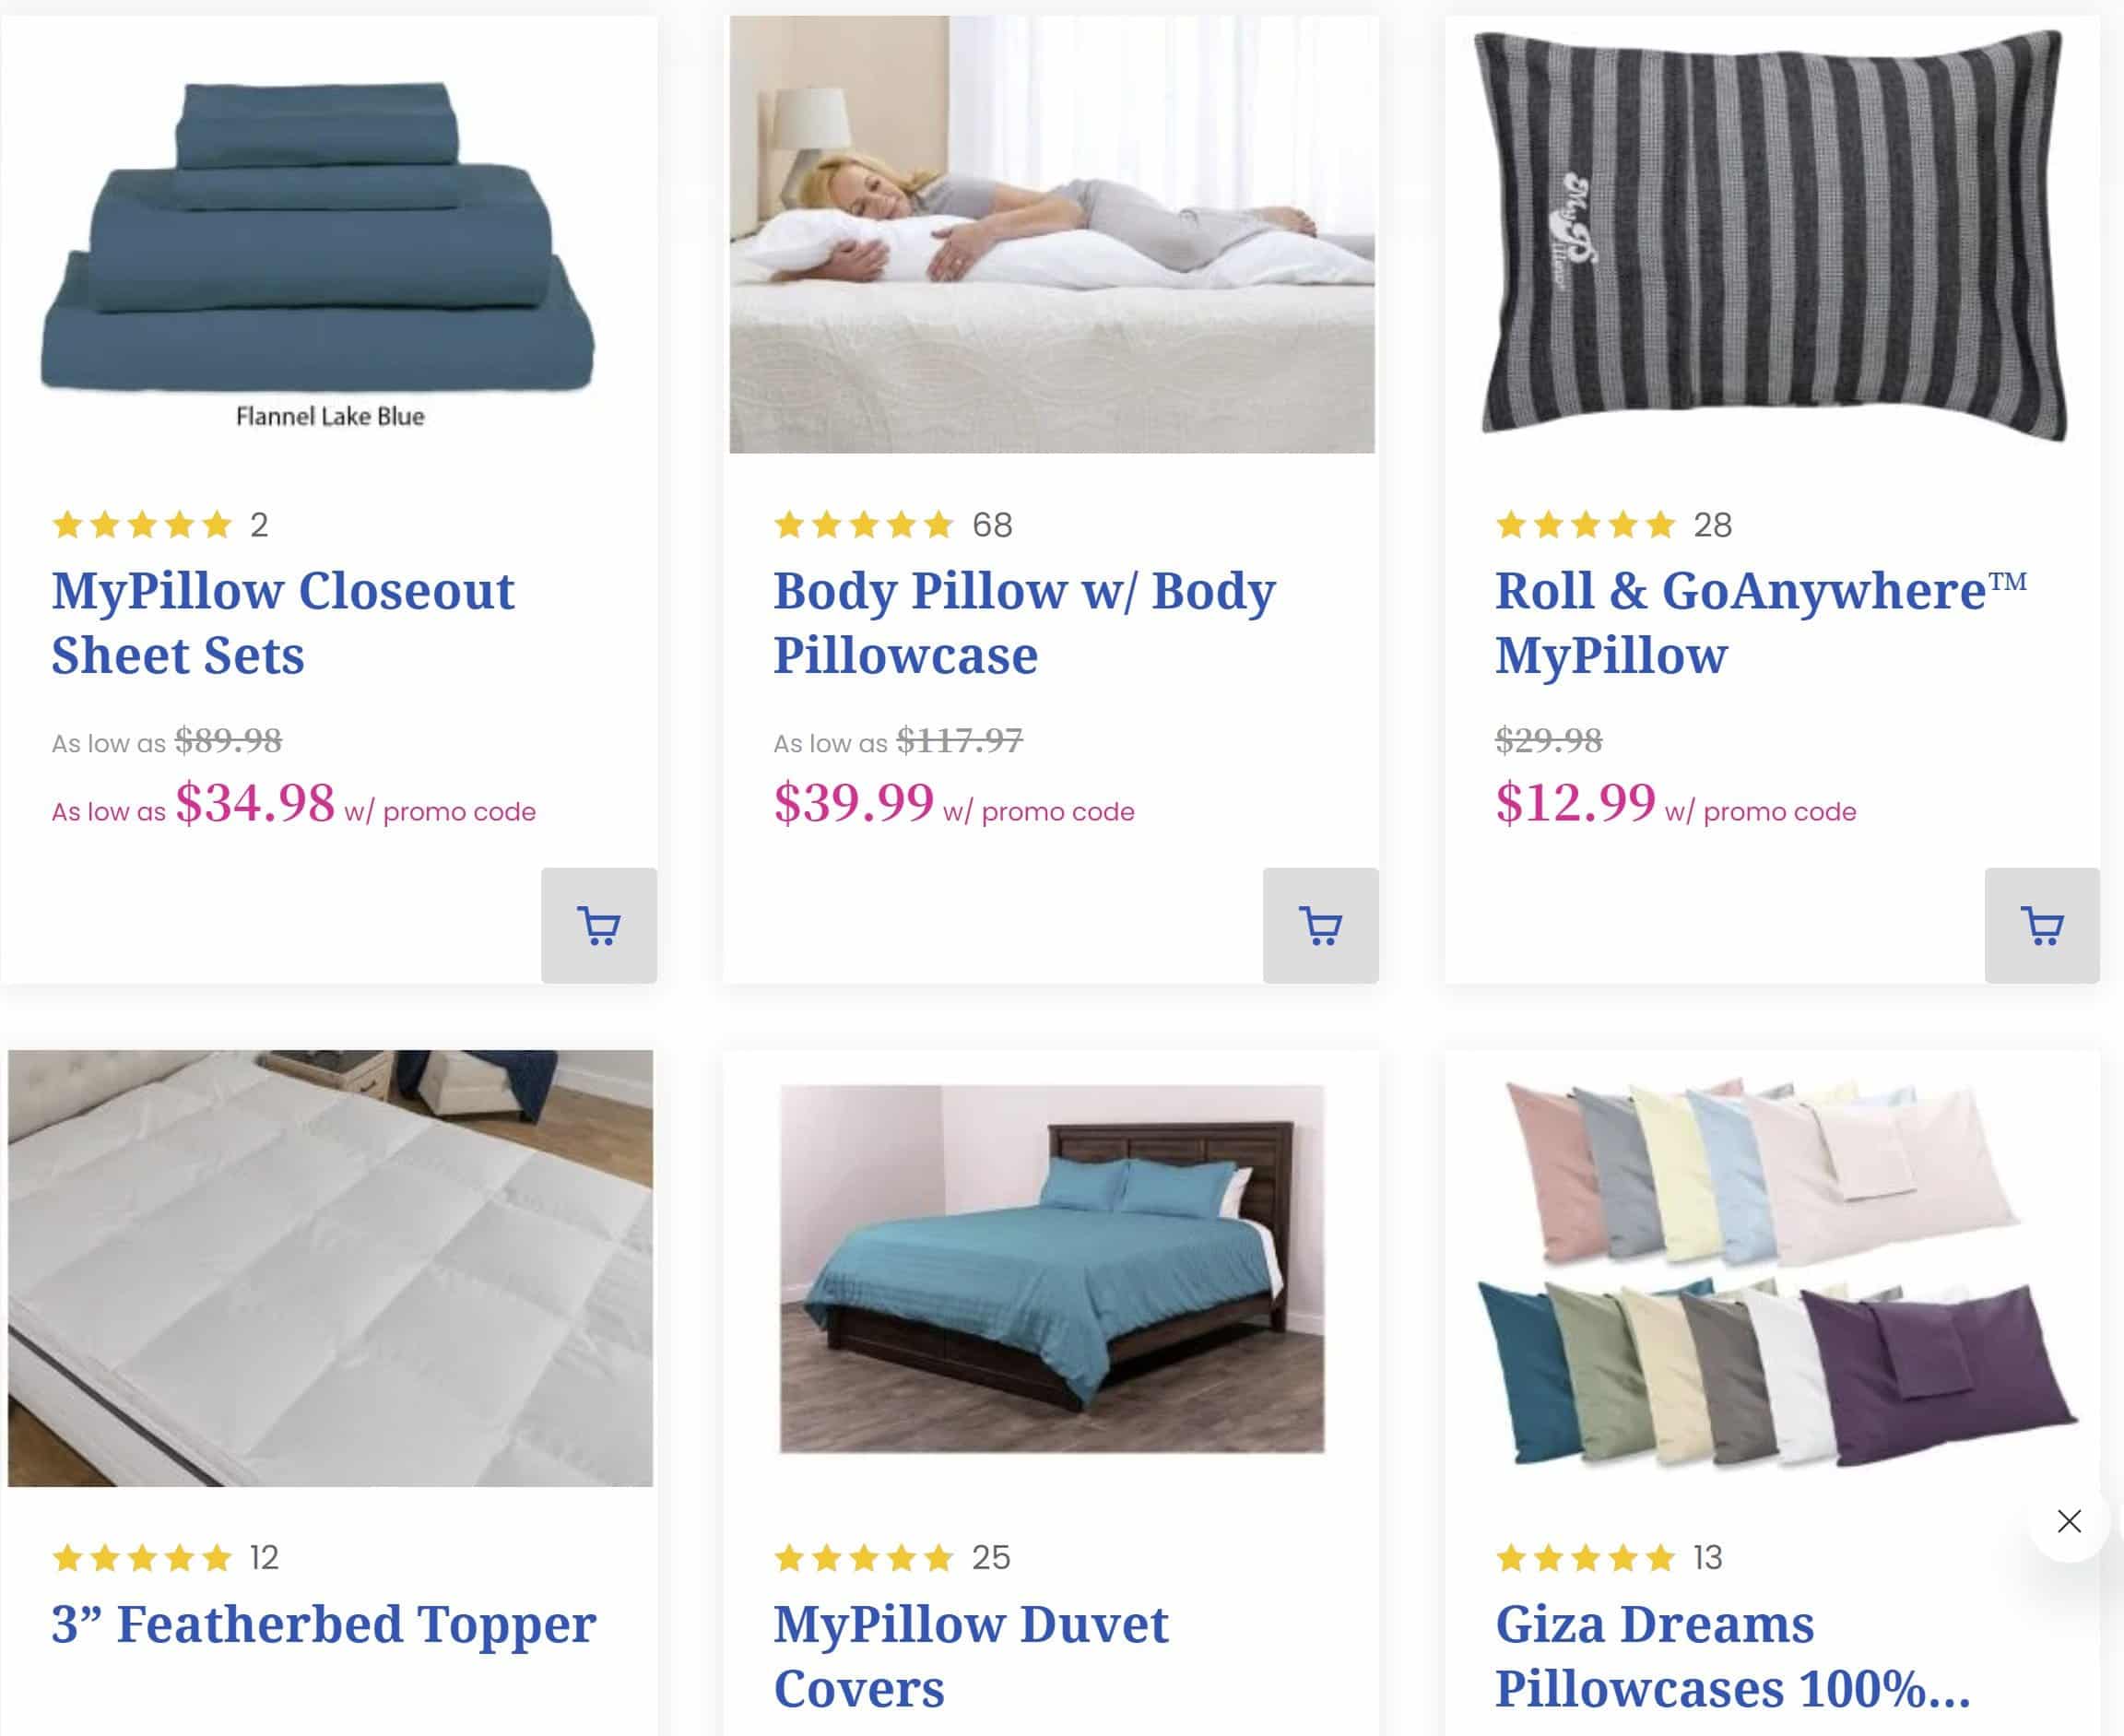 Thirty Clearance Items At MyPillow’s “Closeout And Overstock Sale” (Up To 80% Off)